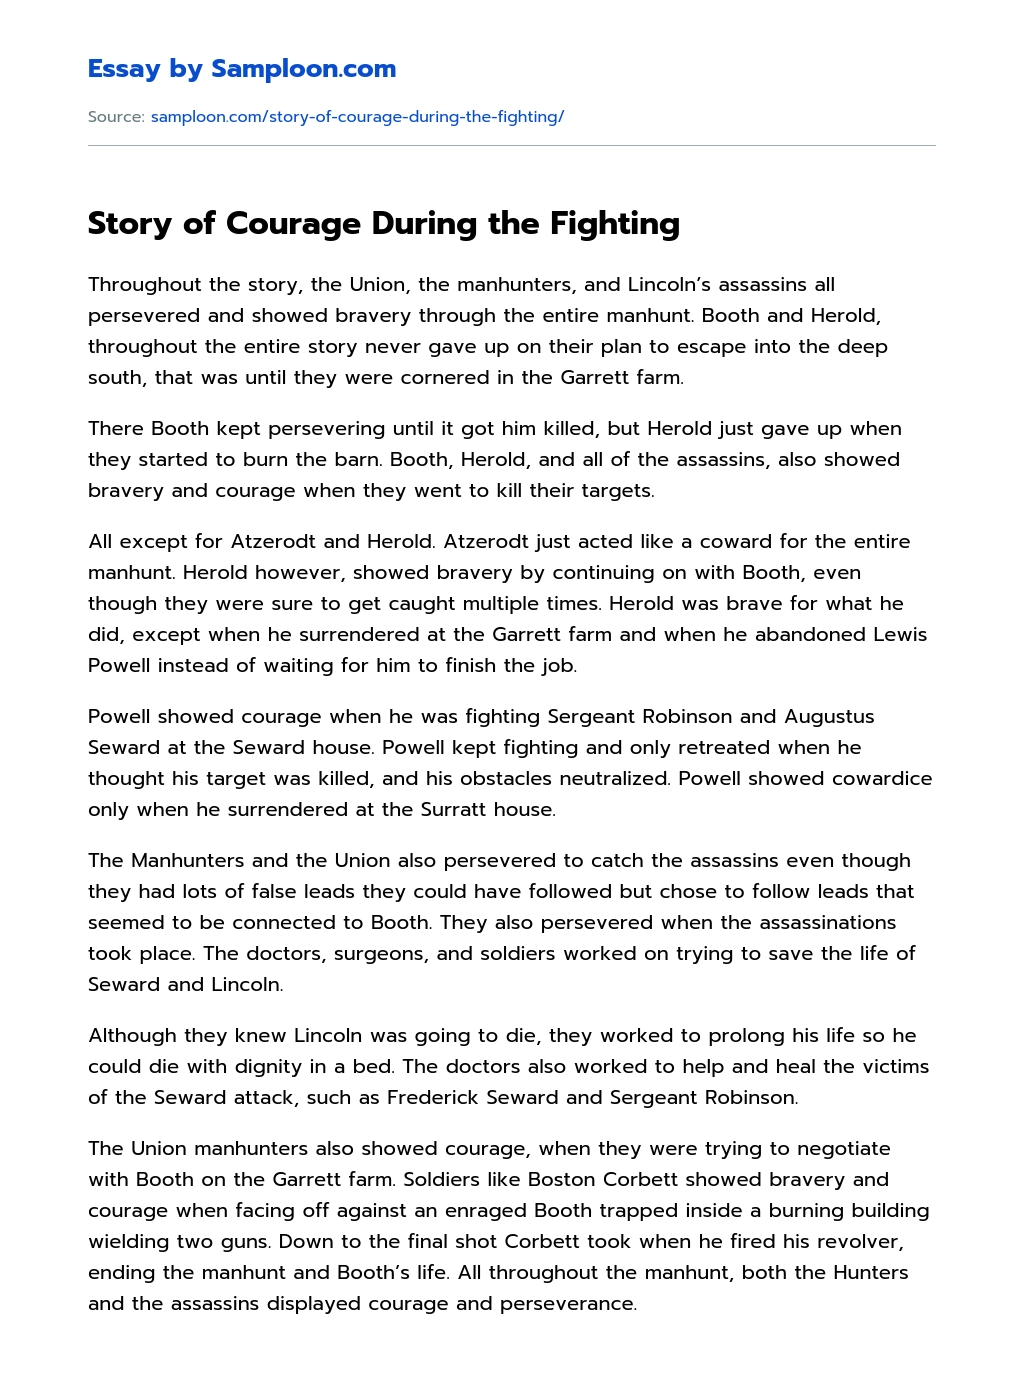 Story of Courage During the Fighting essay